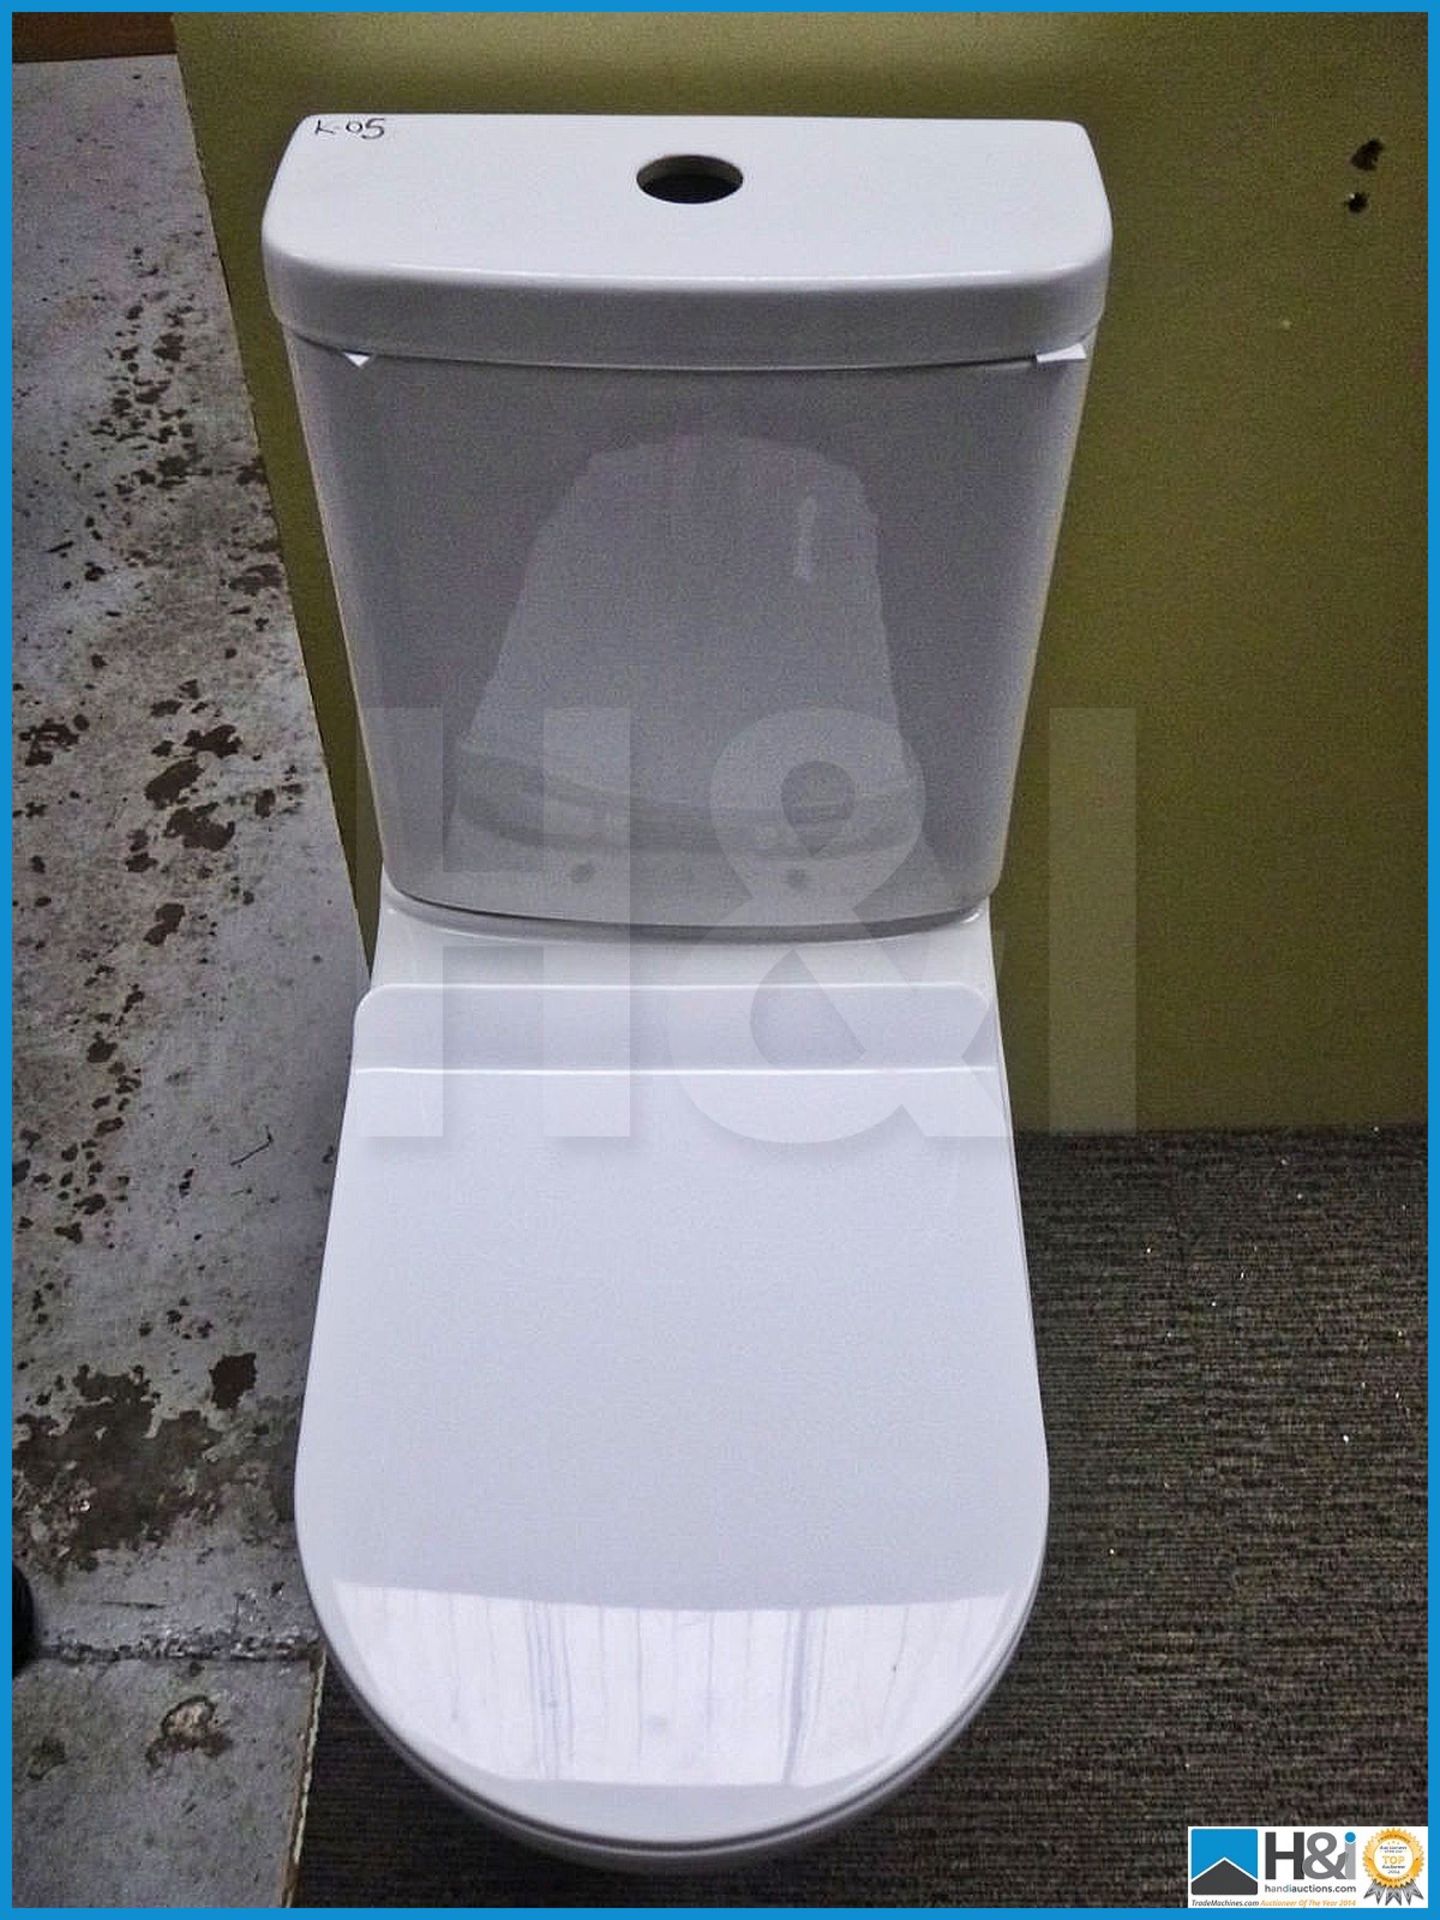 Modern K05 full facia WC toilet complete with sandwich soft close seat. RRP £599.